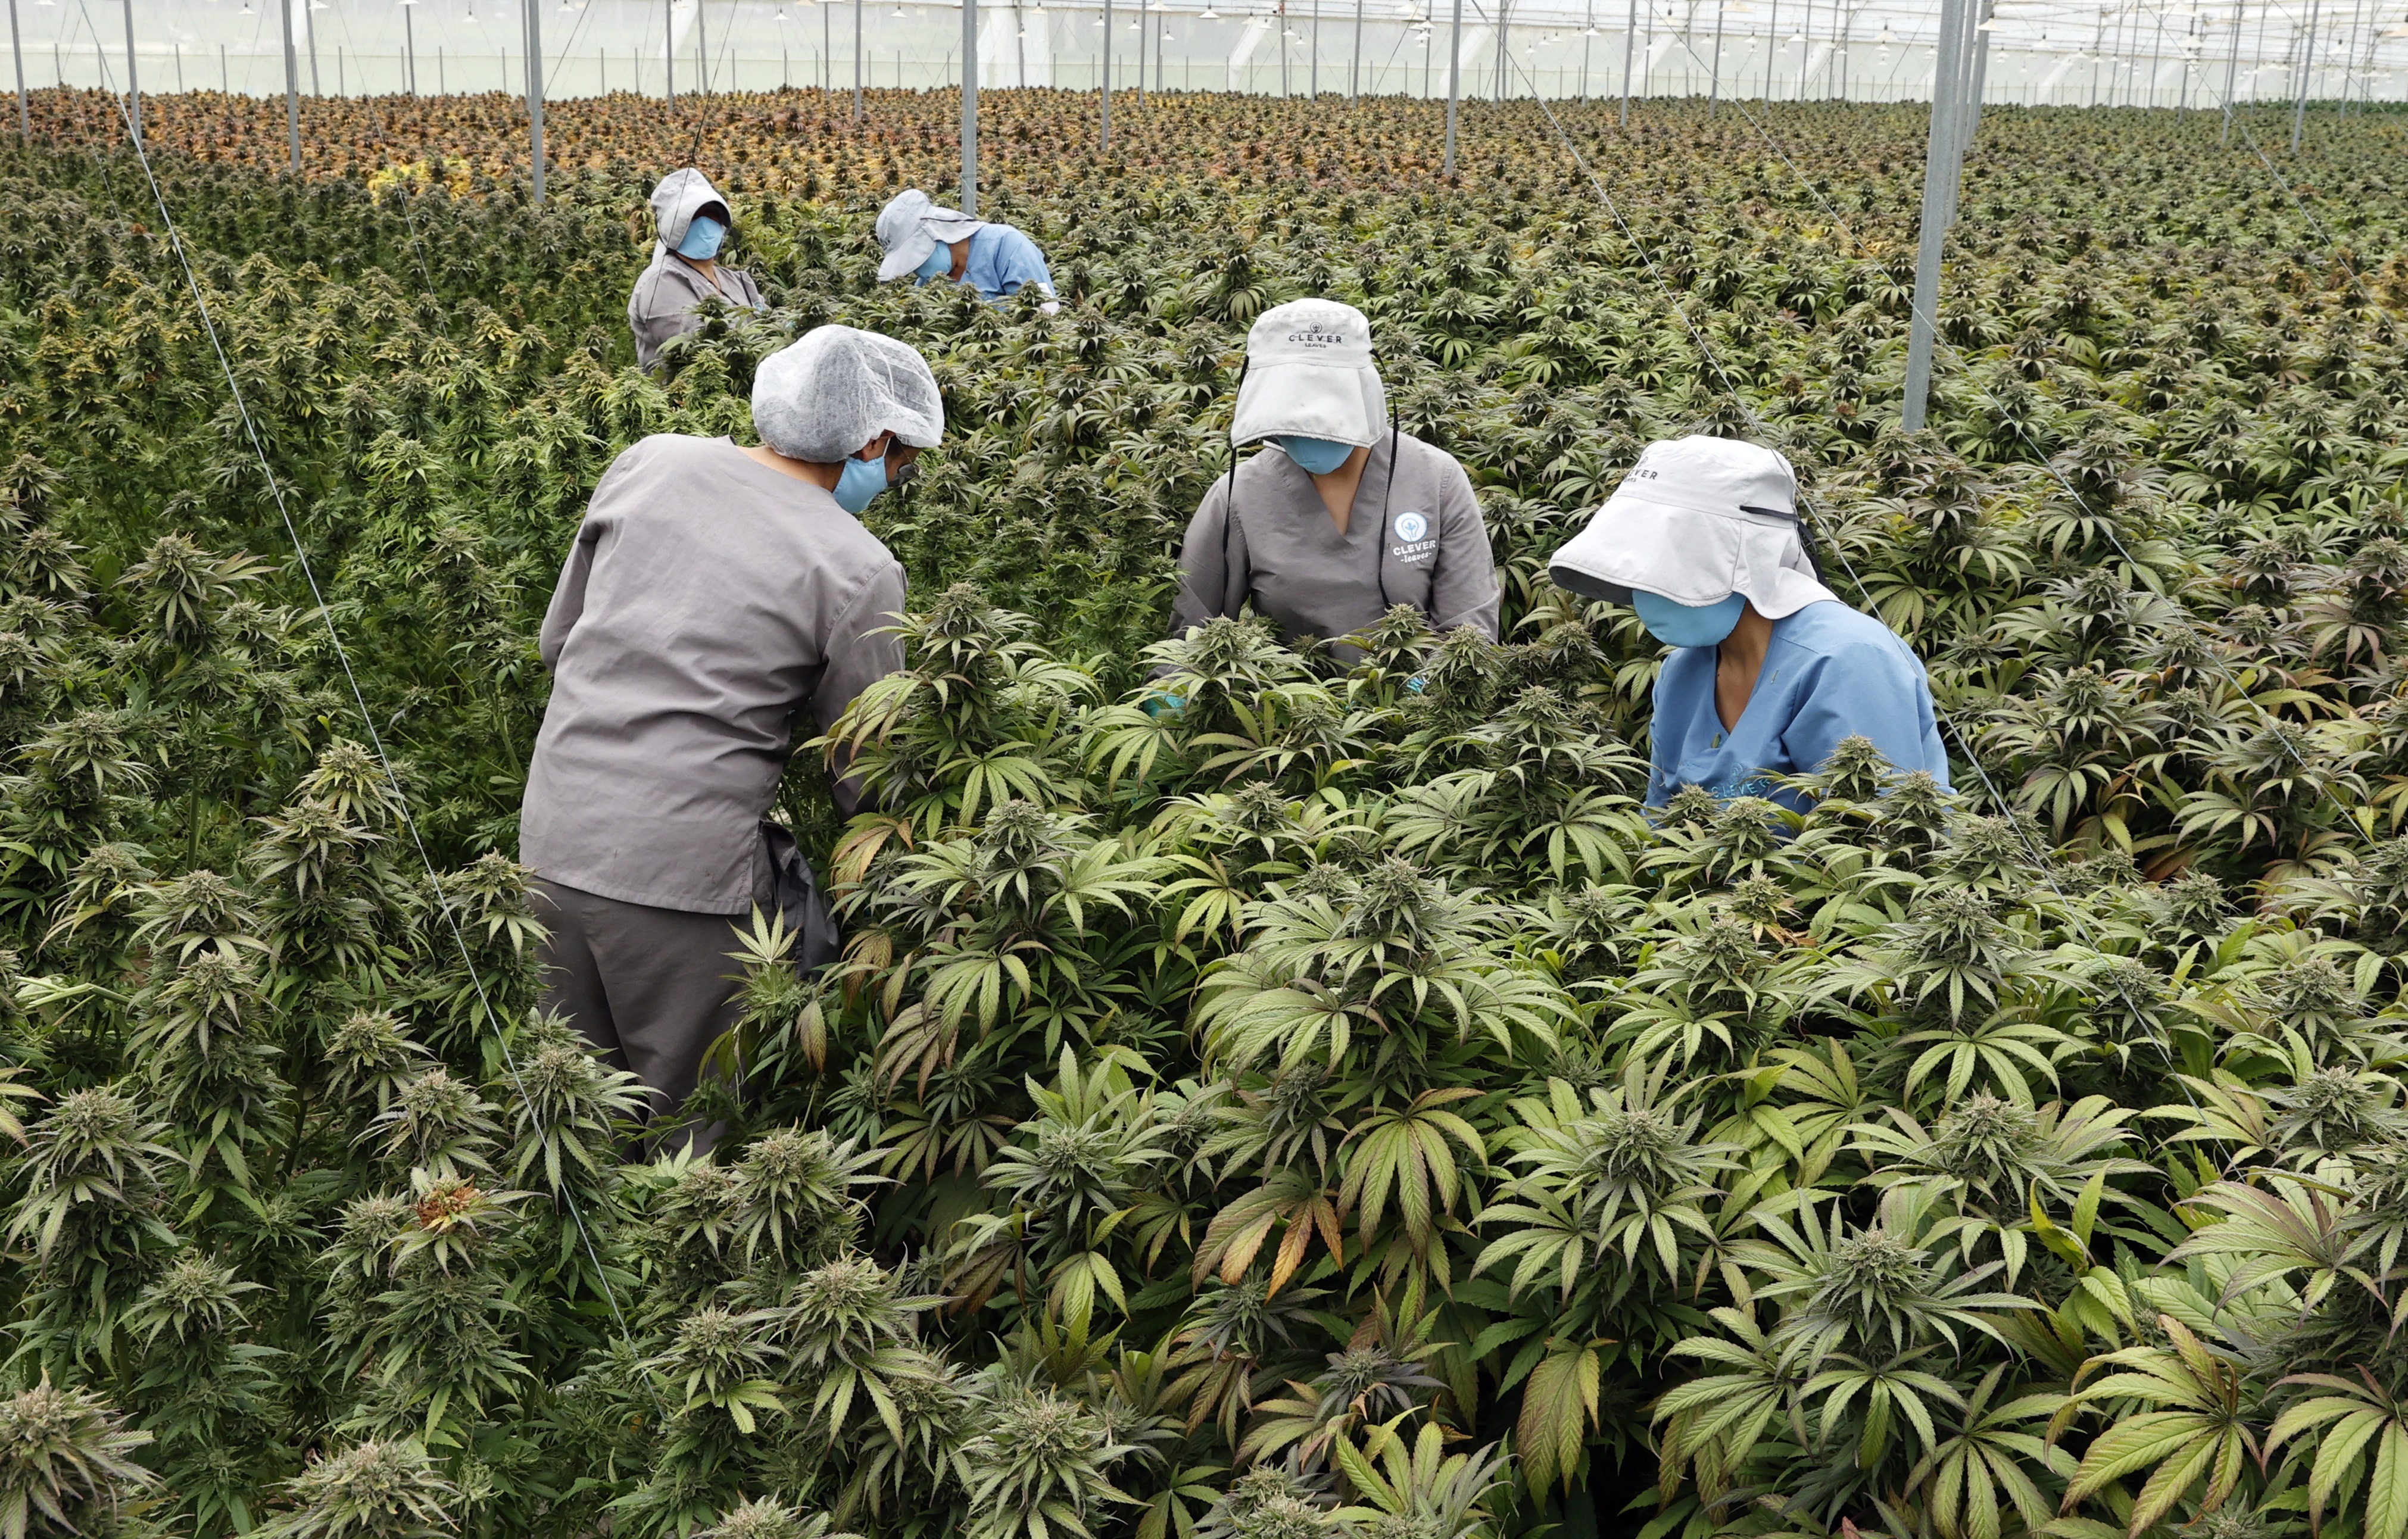 Archive photograph of a group of workers from the Clever Leaves company inspecting a crop of cannabis plants for medicinal use, in Pesca (Boyacá, Colombia).  EFE/Mauricio Dueñas/File